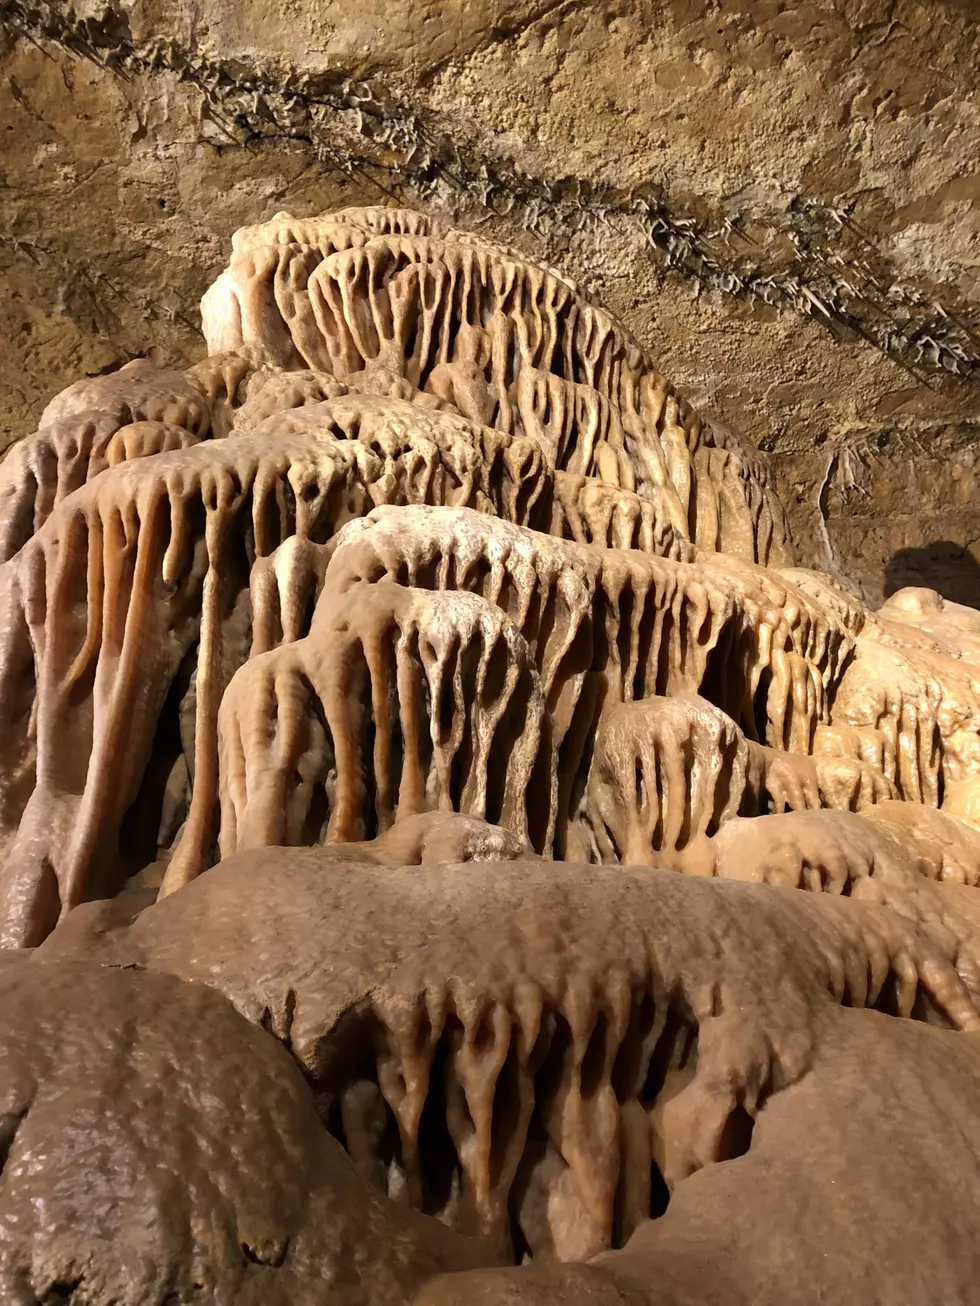 Scope Out One of America’s Most Astonishing Caves in Wisconsin